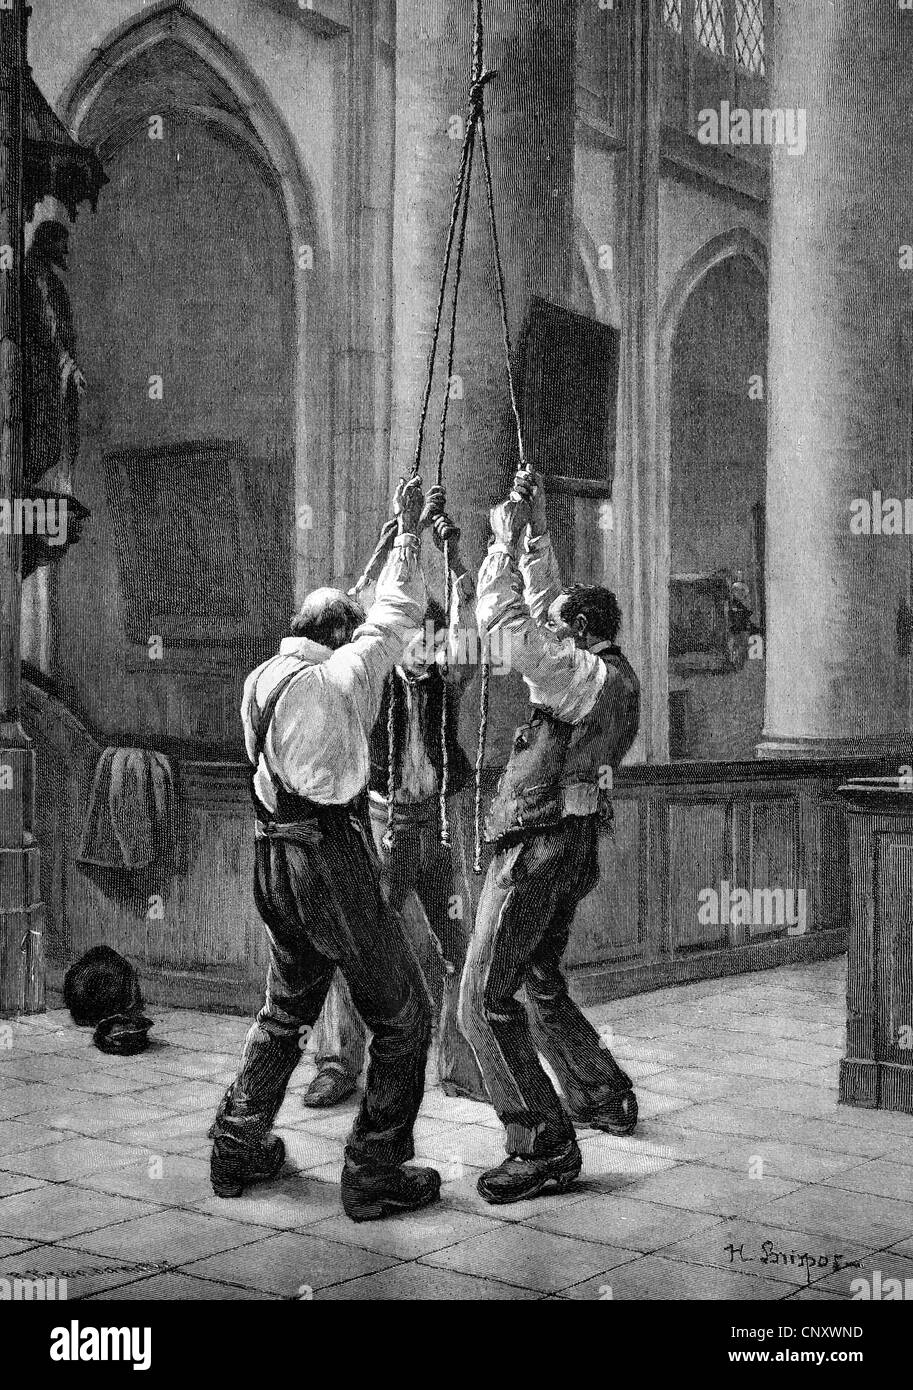 Men ringing bells, historical wood engraving, about 1897 Stock Photo